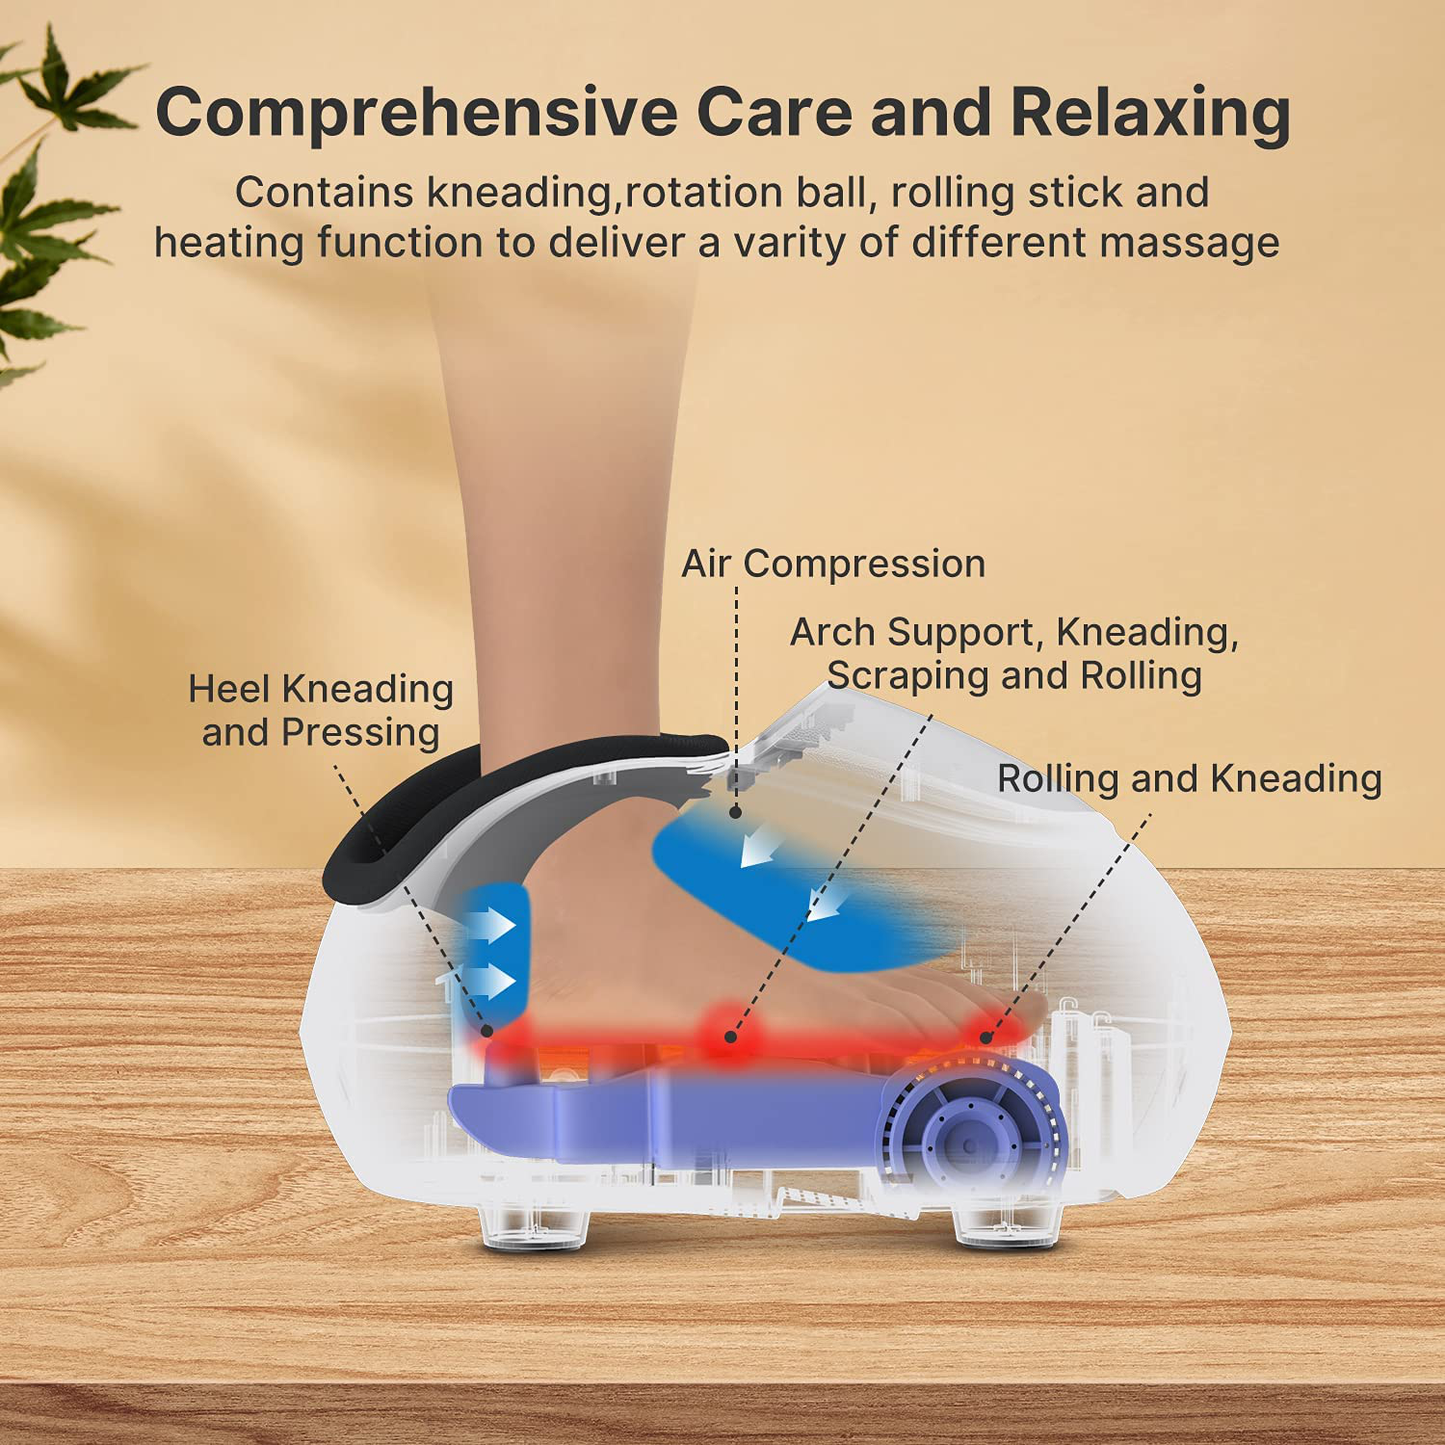 RENPHO Foot Massager Machine with Heat,Shiatsu Deep Kneading, Multi-Level Settings, Delivers Relief for Tired Muscles and Plantar Fasciitis, Fits Feet up to Men Size 12, Christmas Gifts